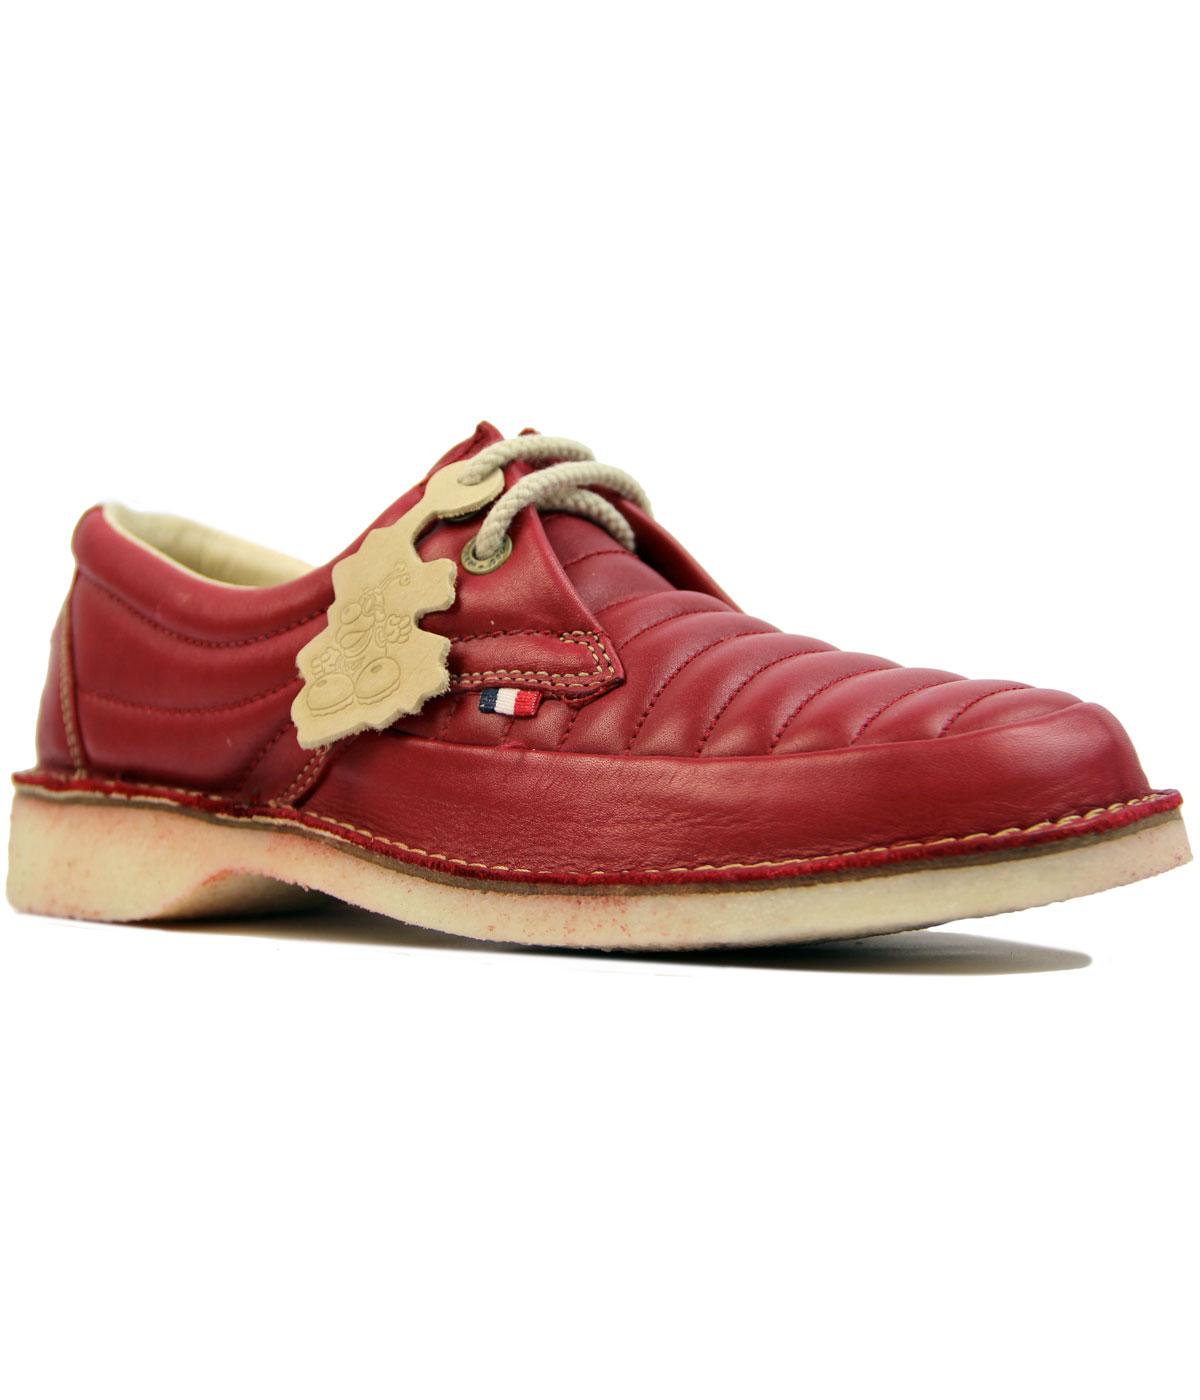 POD HERITAGE Jagger Retro 1970s Quilted Casuals Shoes Burgundy